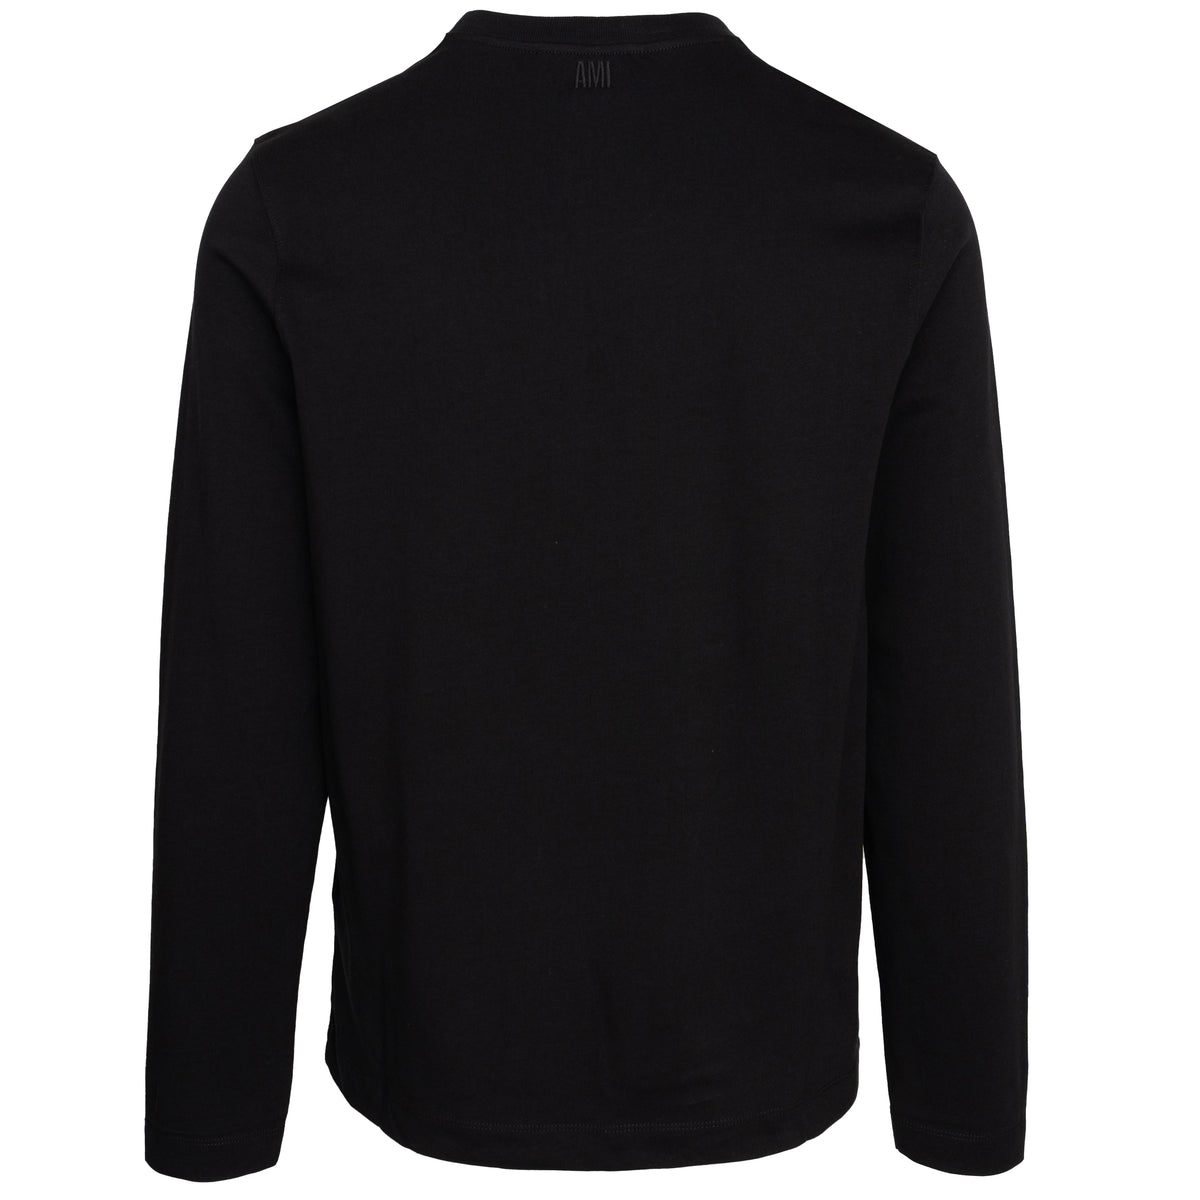 Load image into Gallery viewer, AMI Black AMI Long Sleeve Tee
